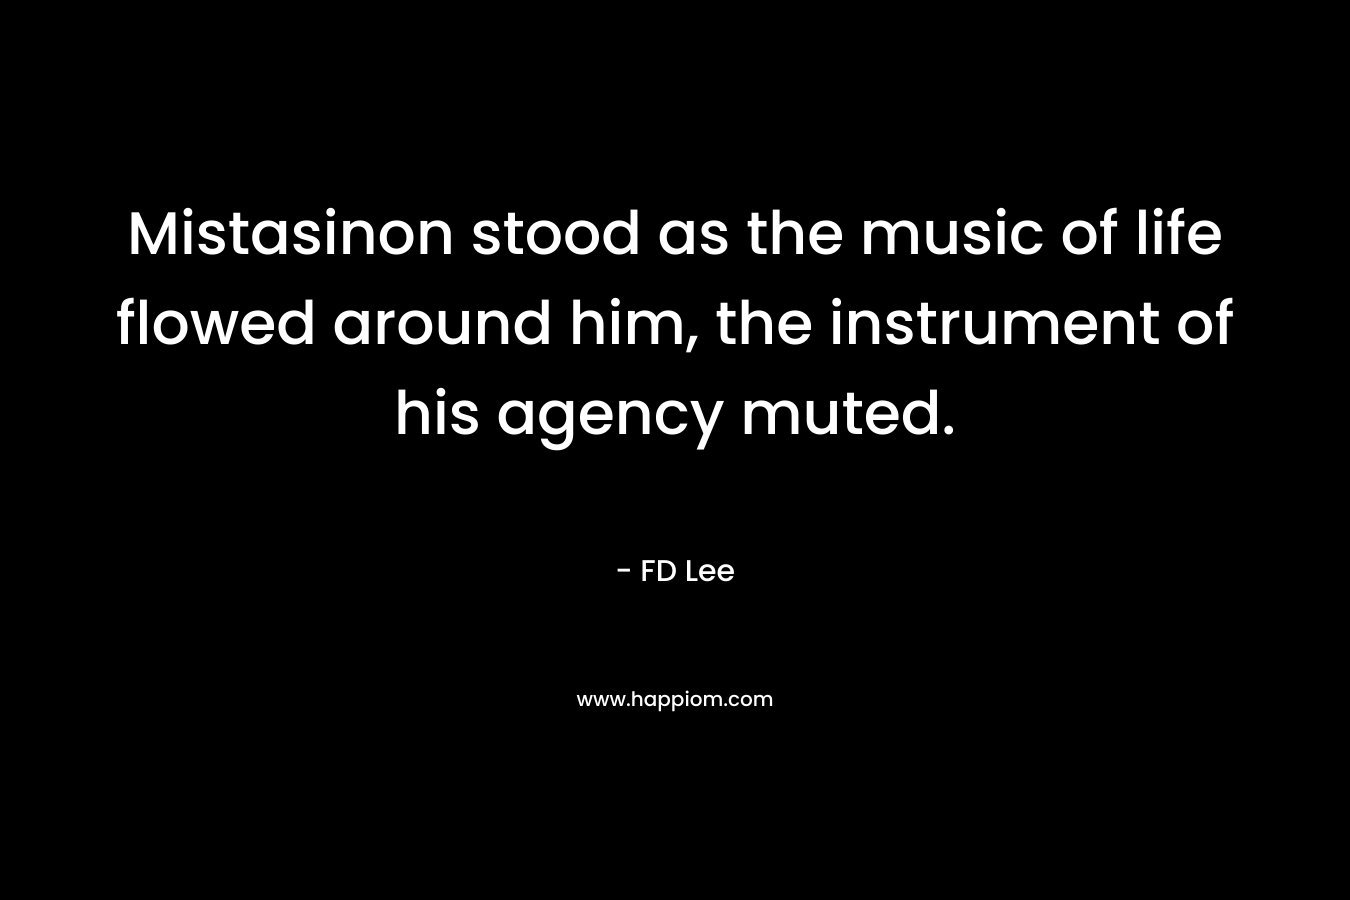 Mistasinon stood as the music of life flowed around him, the instrument of his agency muted.